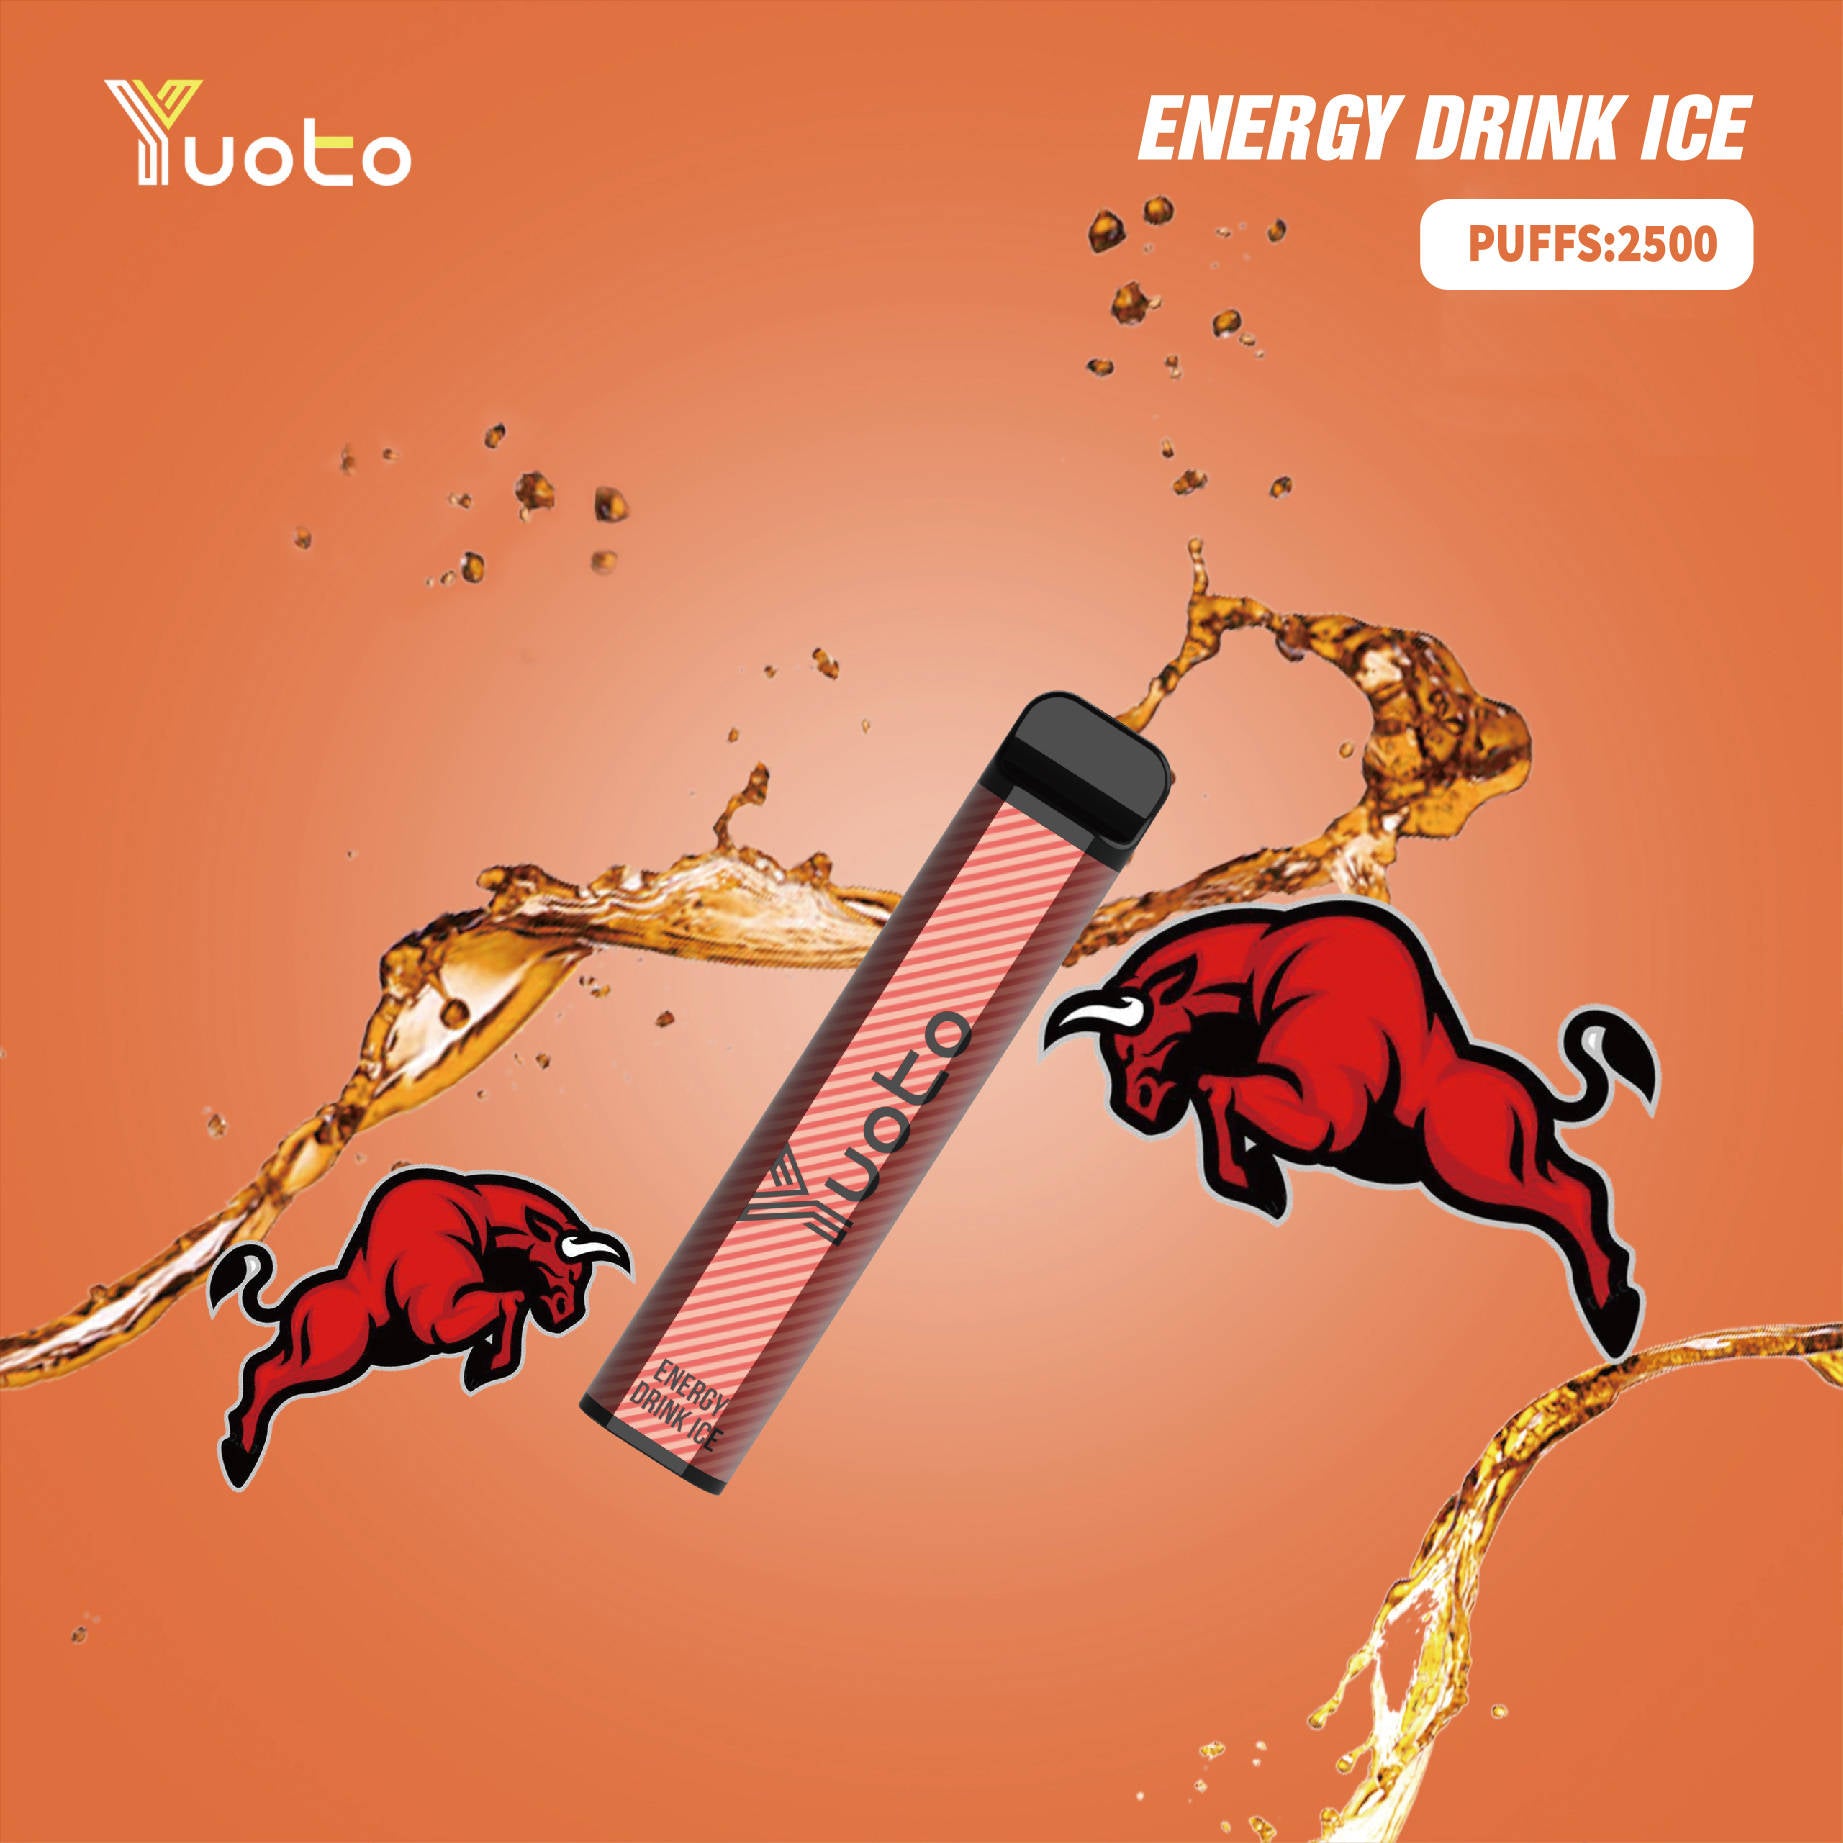 Energy Drink Ice Flavor: Cool and invigorating energy drink-inspired vape for an energizing and refreshing vaping experience.